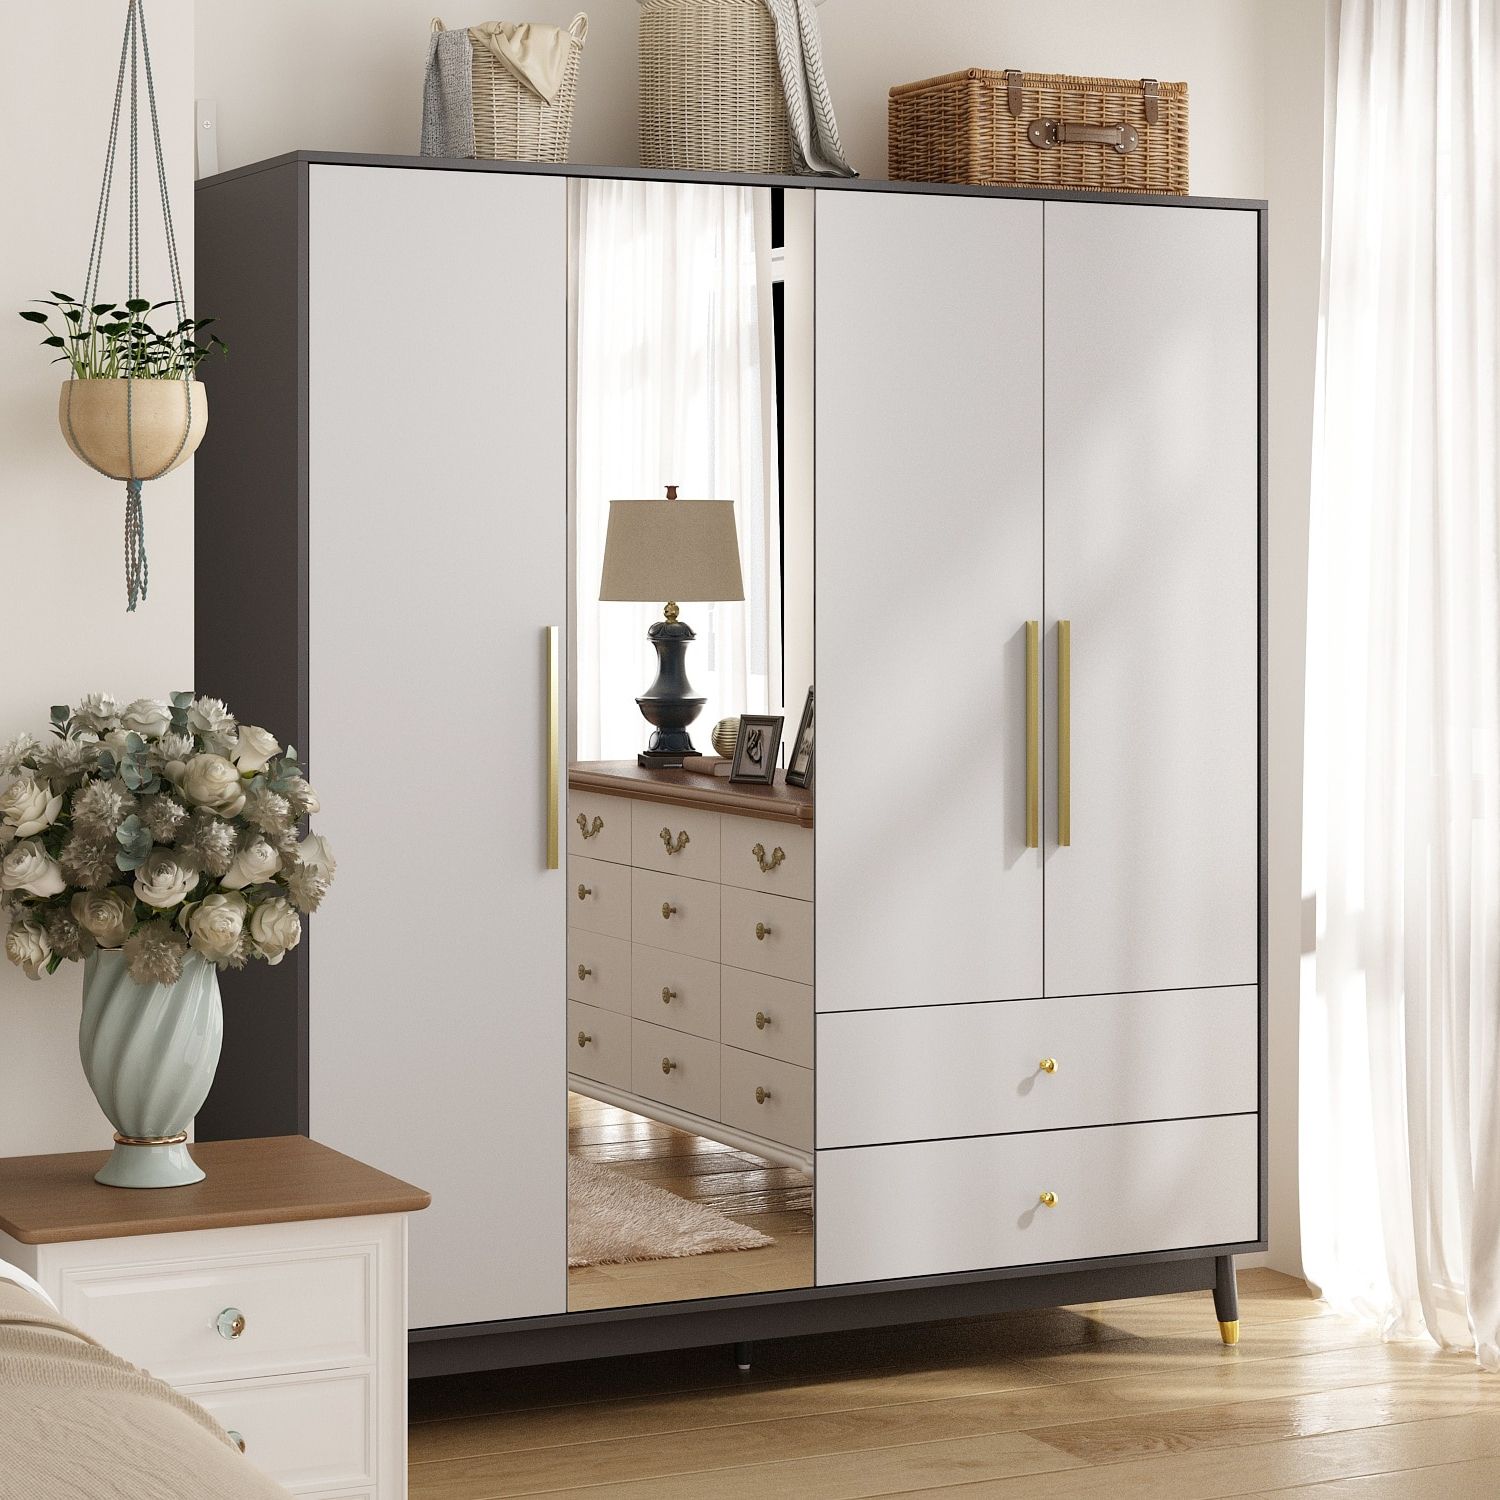 Wardrobe Armoire Closet With Mirror Wardrobe Cabinet With 2 Drawers – Bed  Bath & Beyond – 37684302 With Regard To Mirrored Wardrobes With Drawers (Gallery 3 of 20)